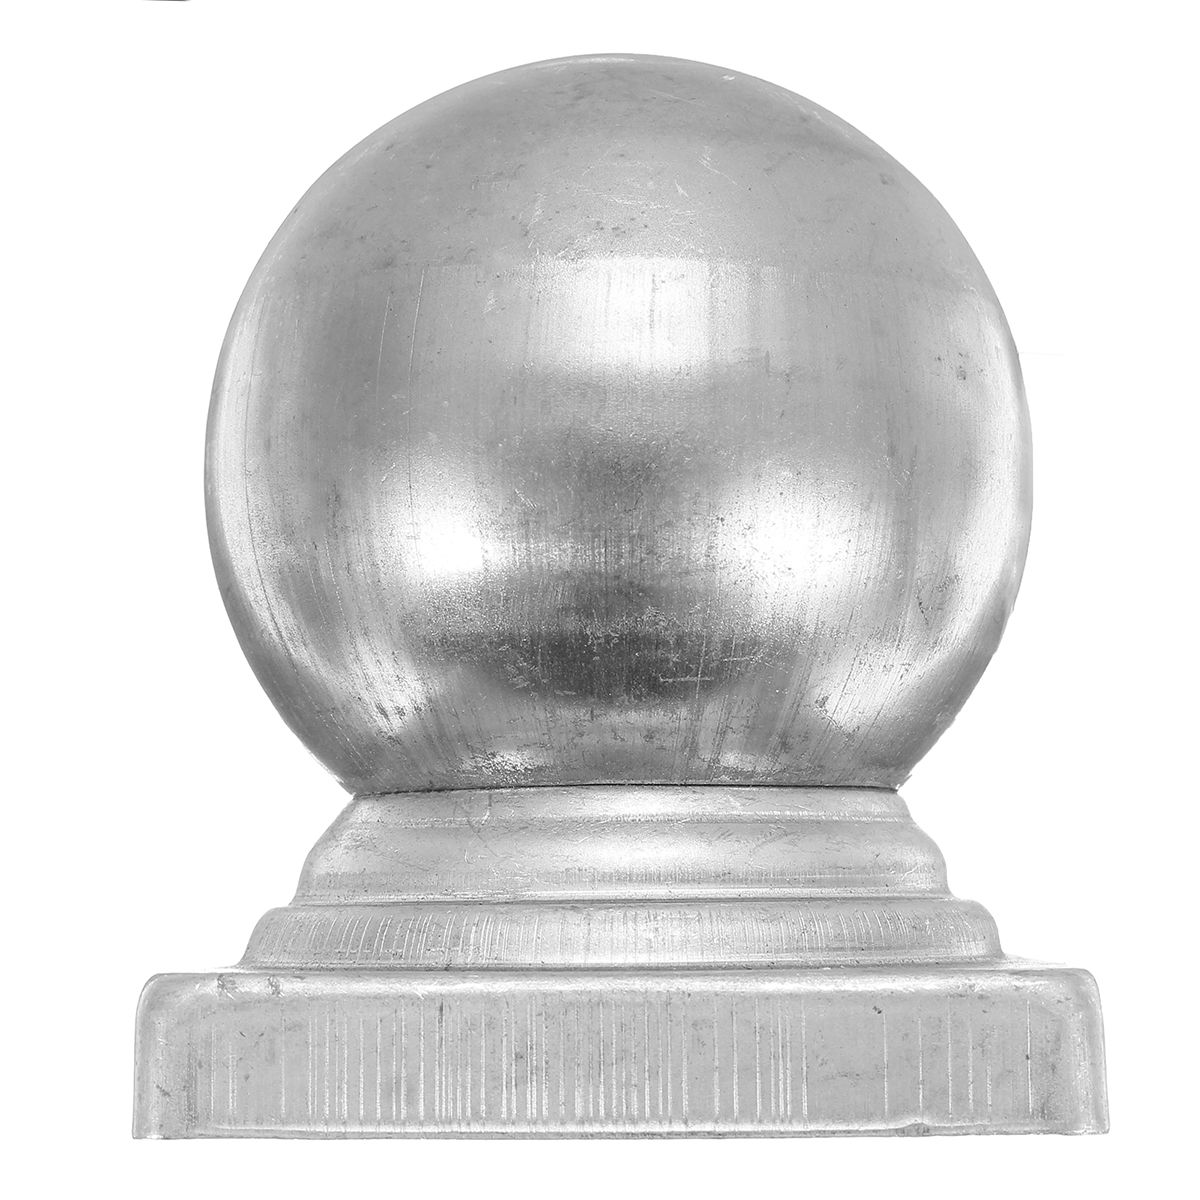 40mm-60mm-70mm-Iron-Ball-Top-Fence-Finial-Post-Cap-with-Flat-Square-Base-Decor-Protection-1210533